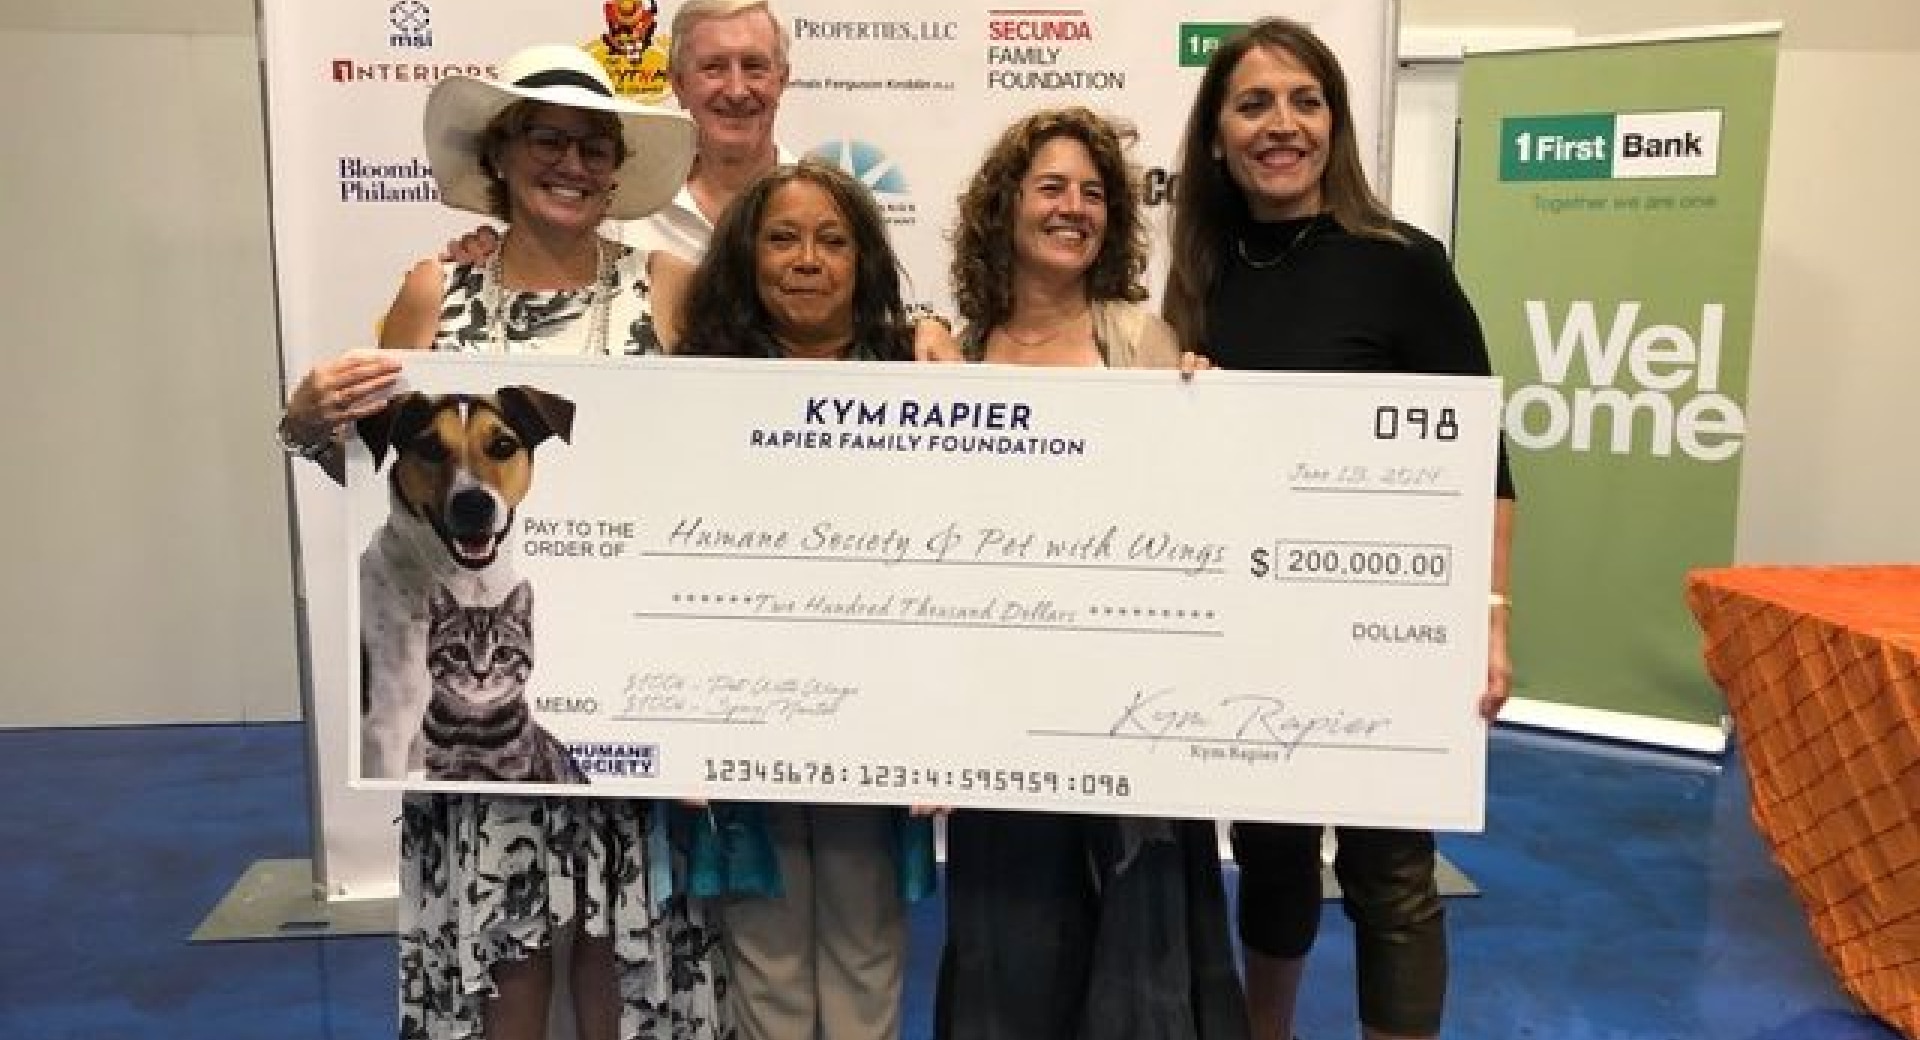 Community Foundation of the Virgin Islands Receives $200,000 Donation from Kym Rapier and Rapier Family Foundation for the Humane Society of St. Thomas